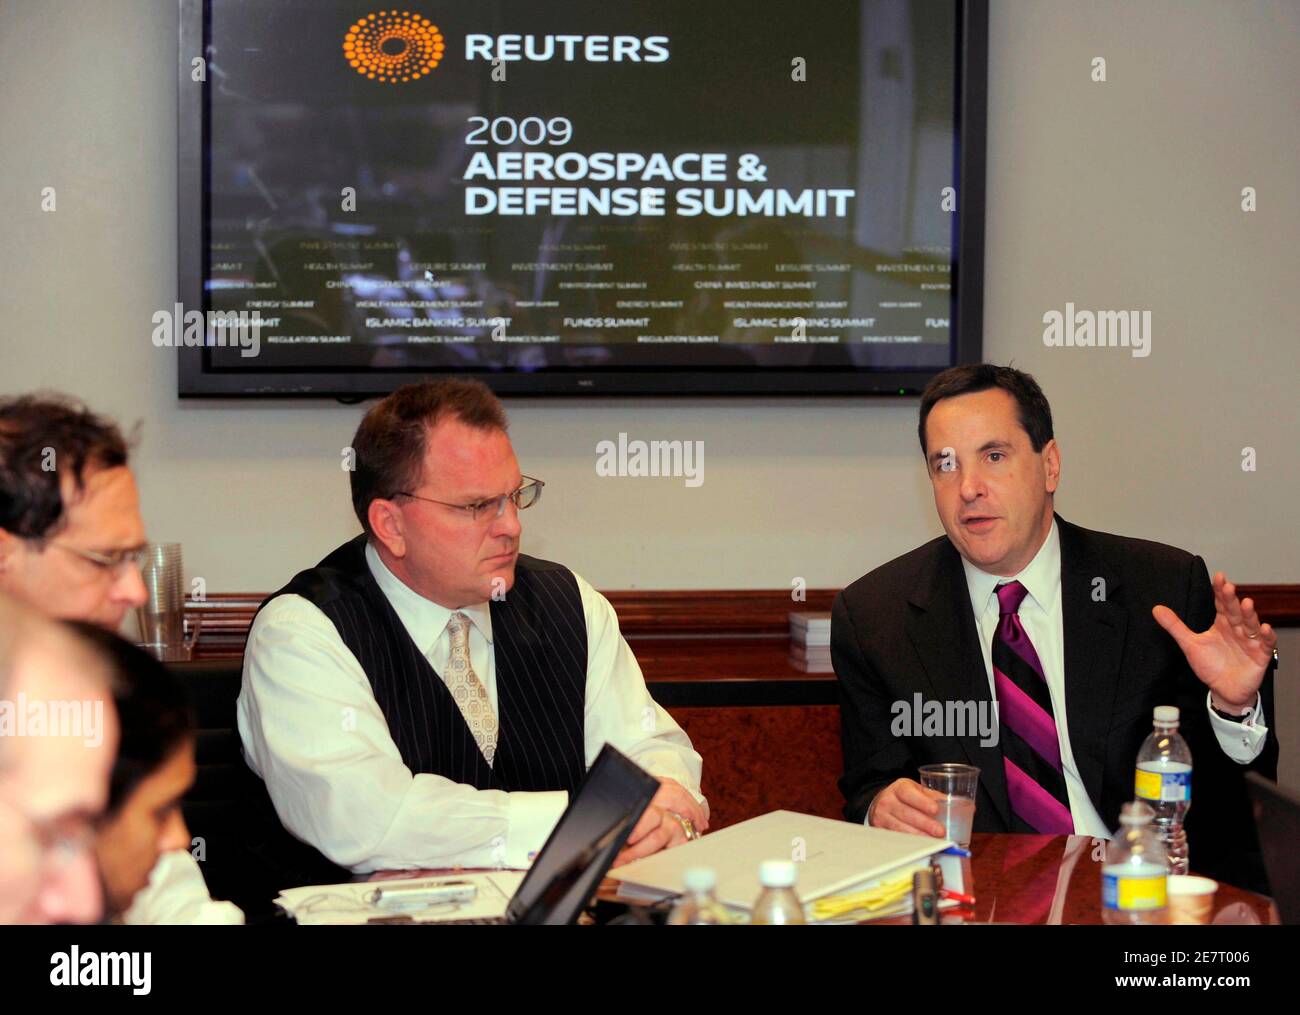 Richard Aboulafia (R), analysis vice president at research firm Teal Group, and Jim McAleese, president of McAleese & Associates, brief reporters at the Reuters Aerospace and Defense Summit in Washington December 16, 2009. The analysts gave their views on how the worldwide recession is affecting jobs, research and acquisitions in the civilian and military aerospace industries.     REUTERS/Mike Theiler   (UNITED STATES - Tags: TRANSPORT BUSINESS MILITARY) Stock Photo